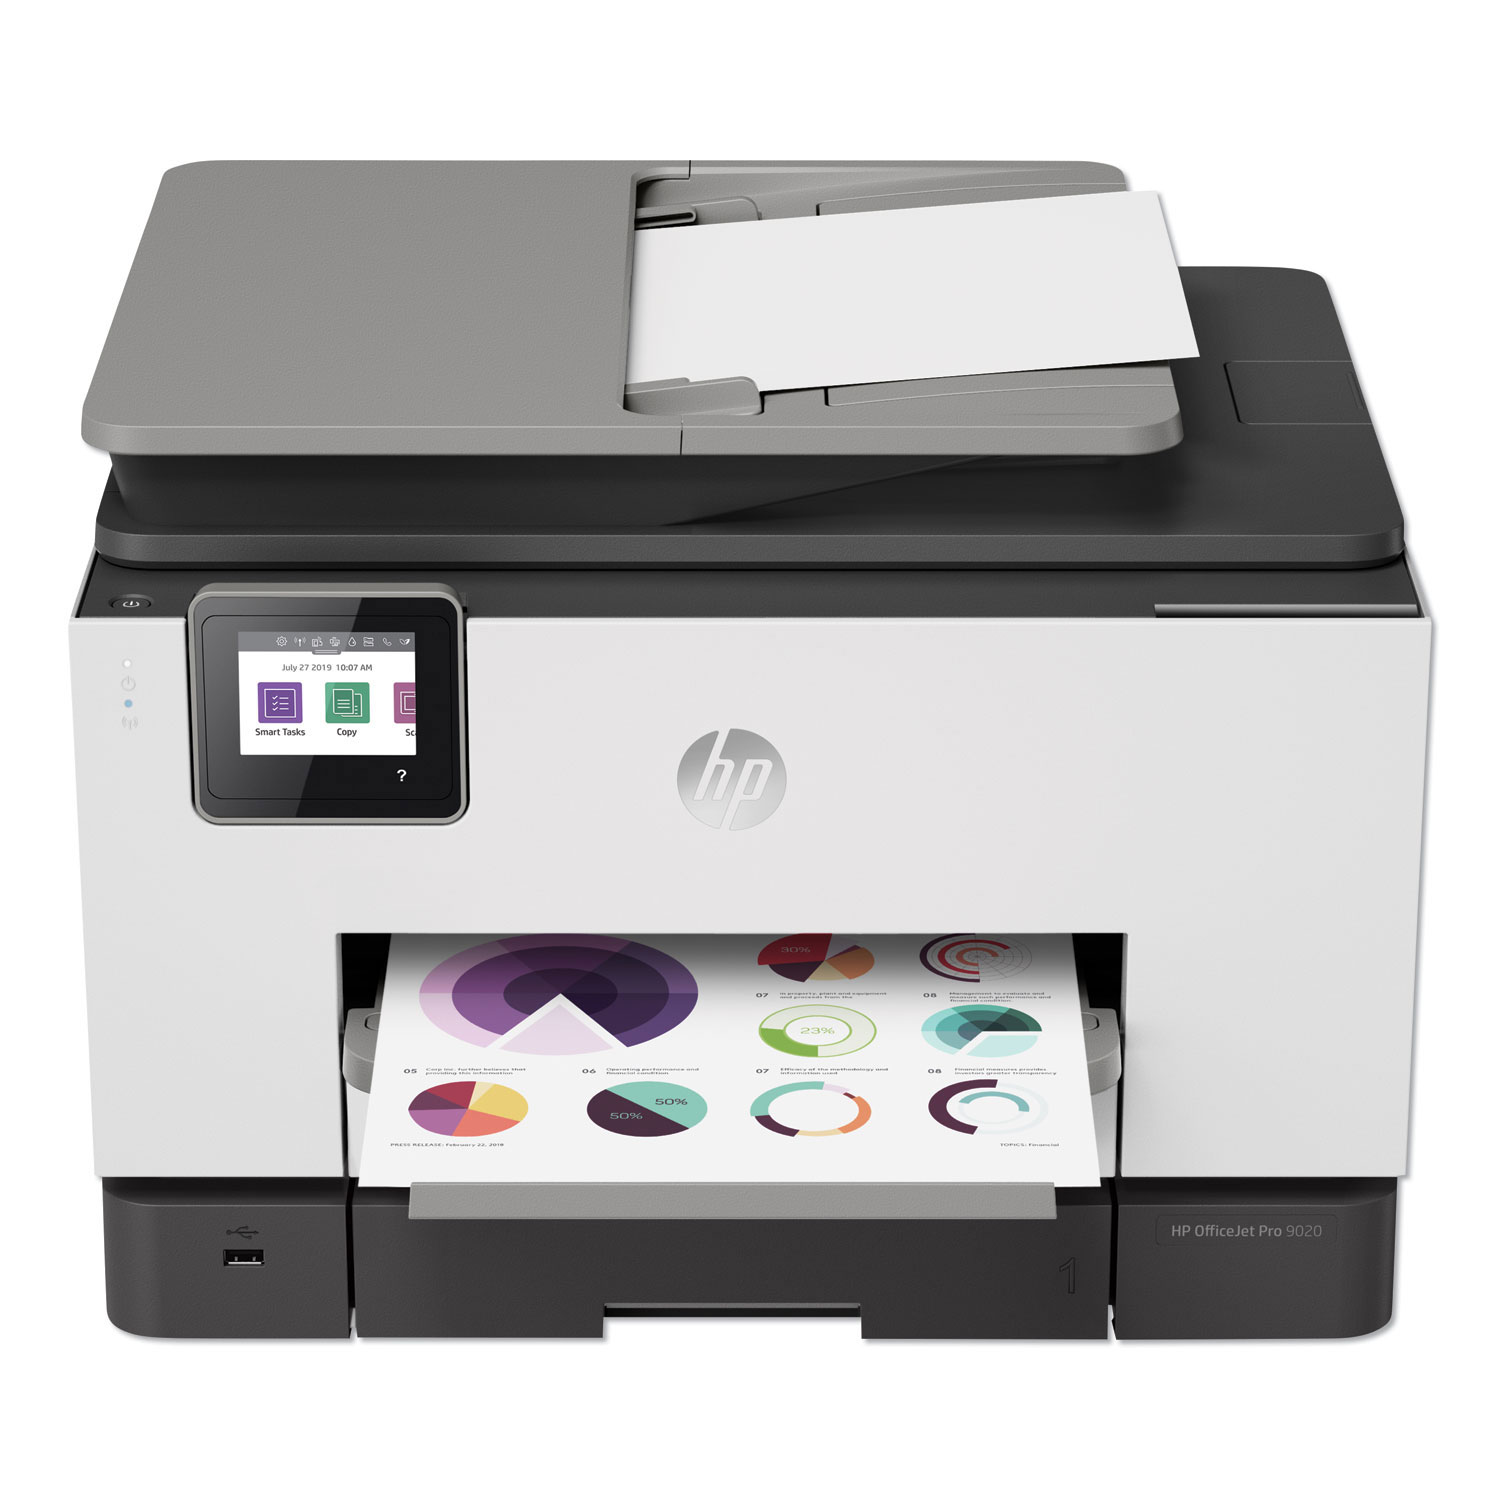 adding printers to hp easy scan